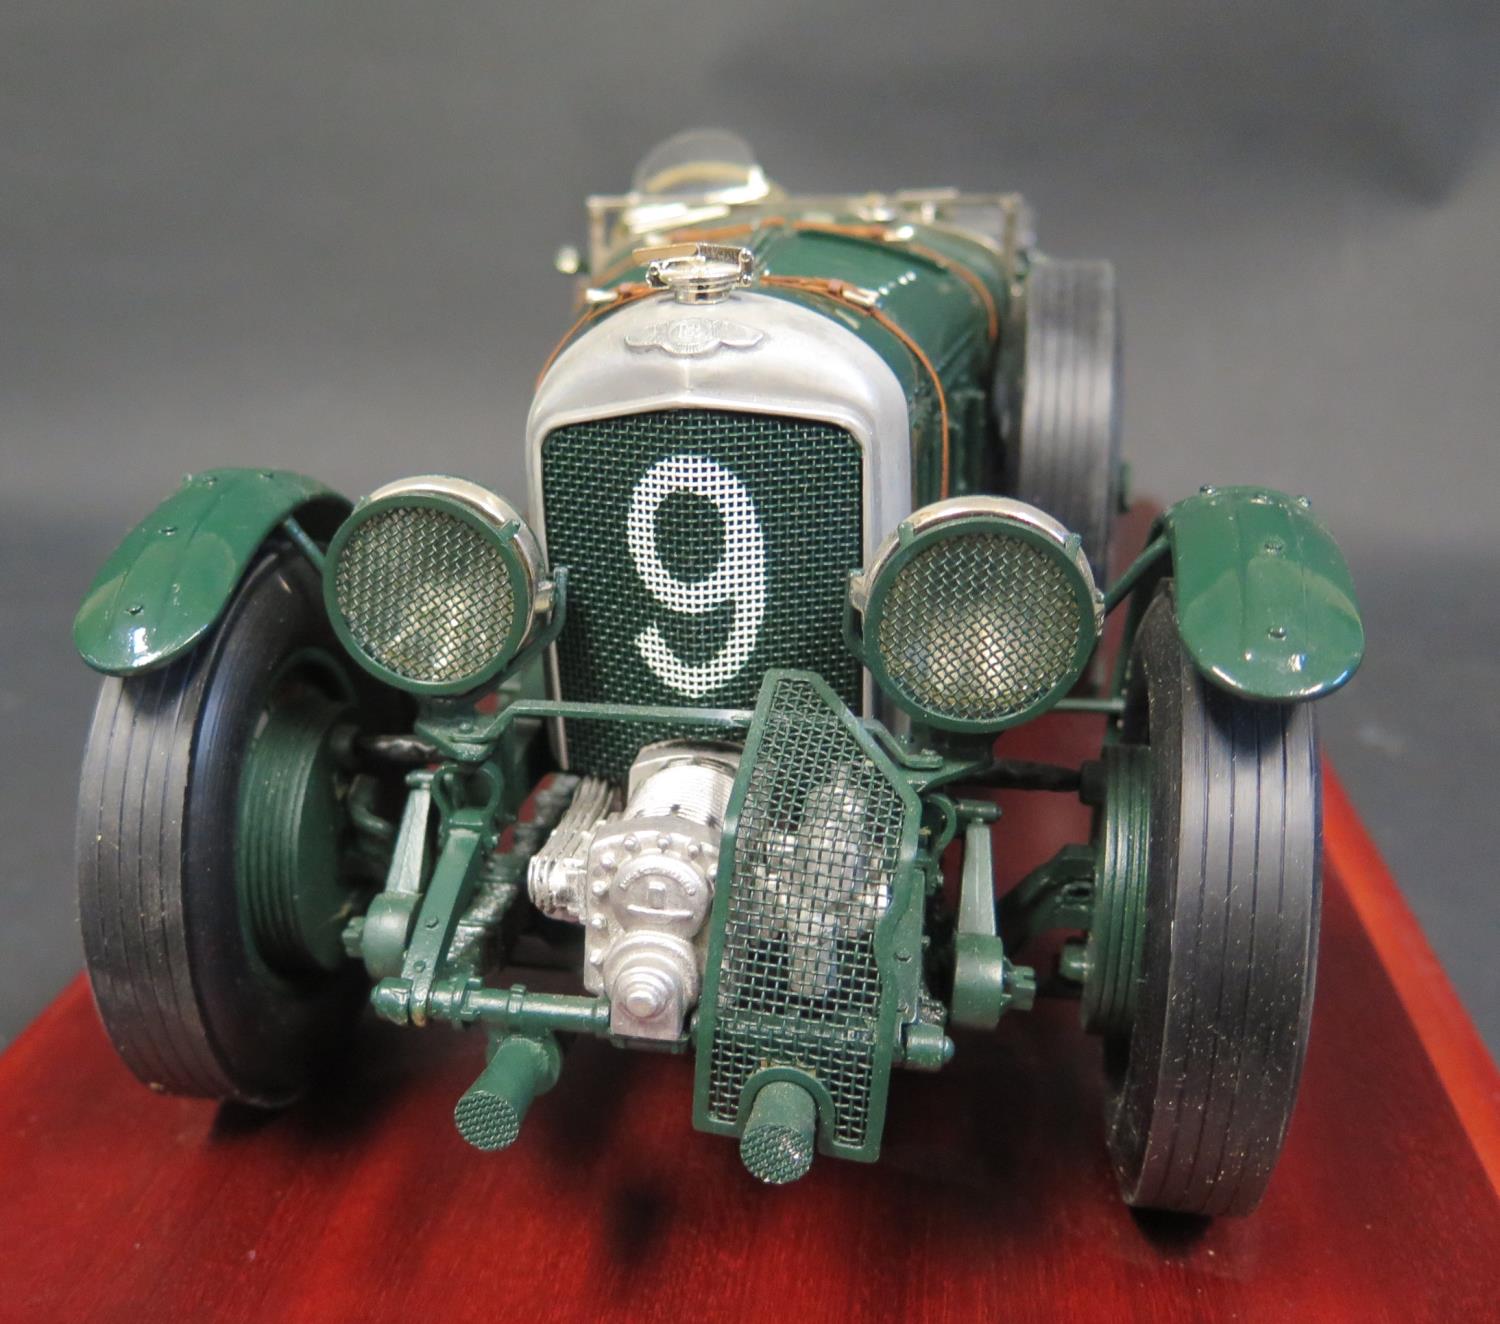 A 1:12 Scale Blueprint Models 'The Blower Bentley' 1930 4.5 Litre Supercharged Bentley No. 27 of - Image 6 of 11